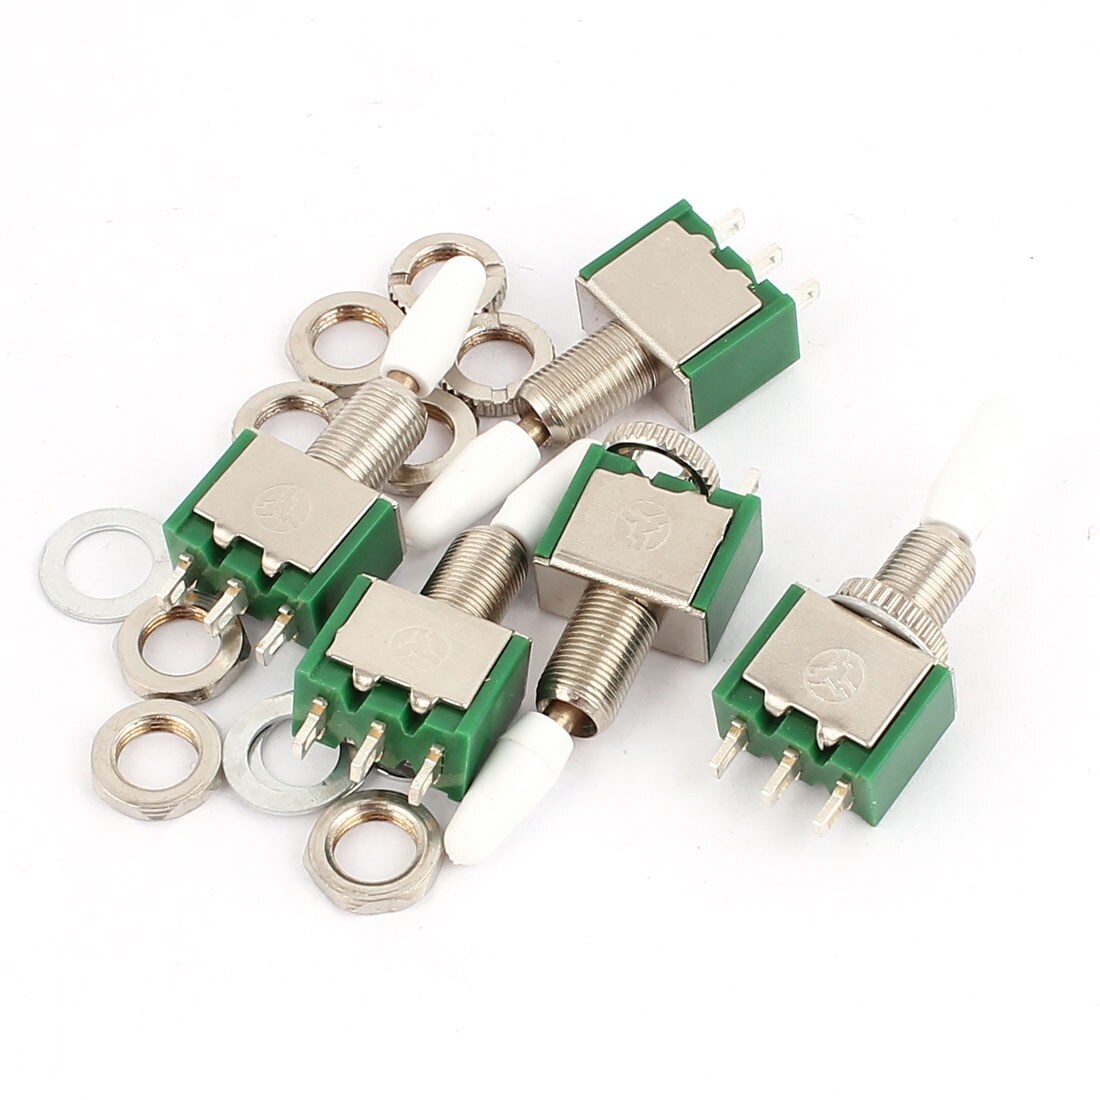 5PCS AC ON/OFF SPDT 2 Position Latching Toggle Schalter Useful New AHS 